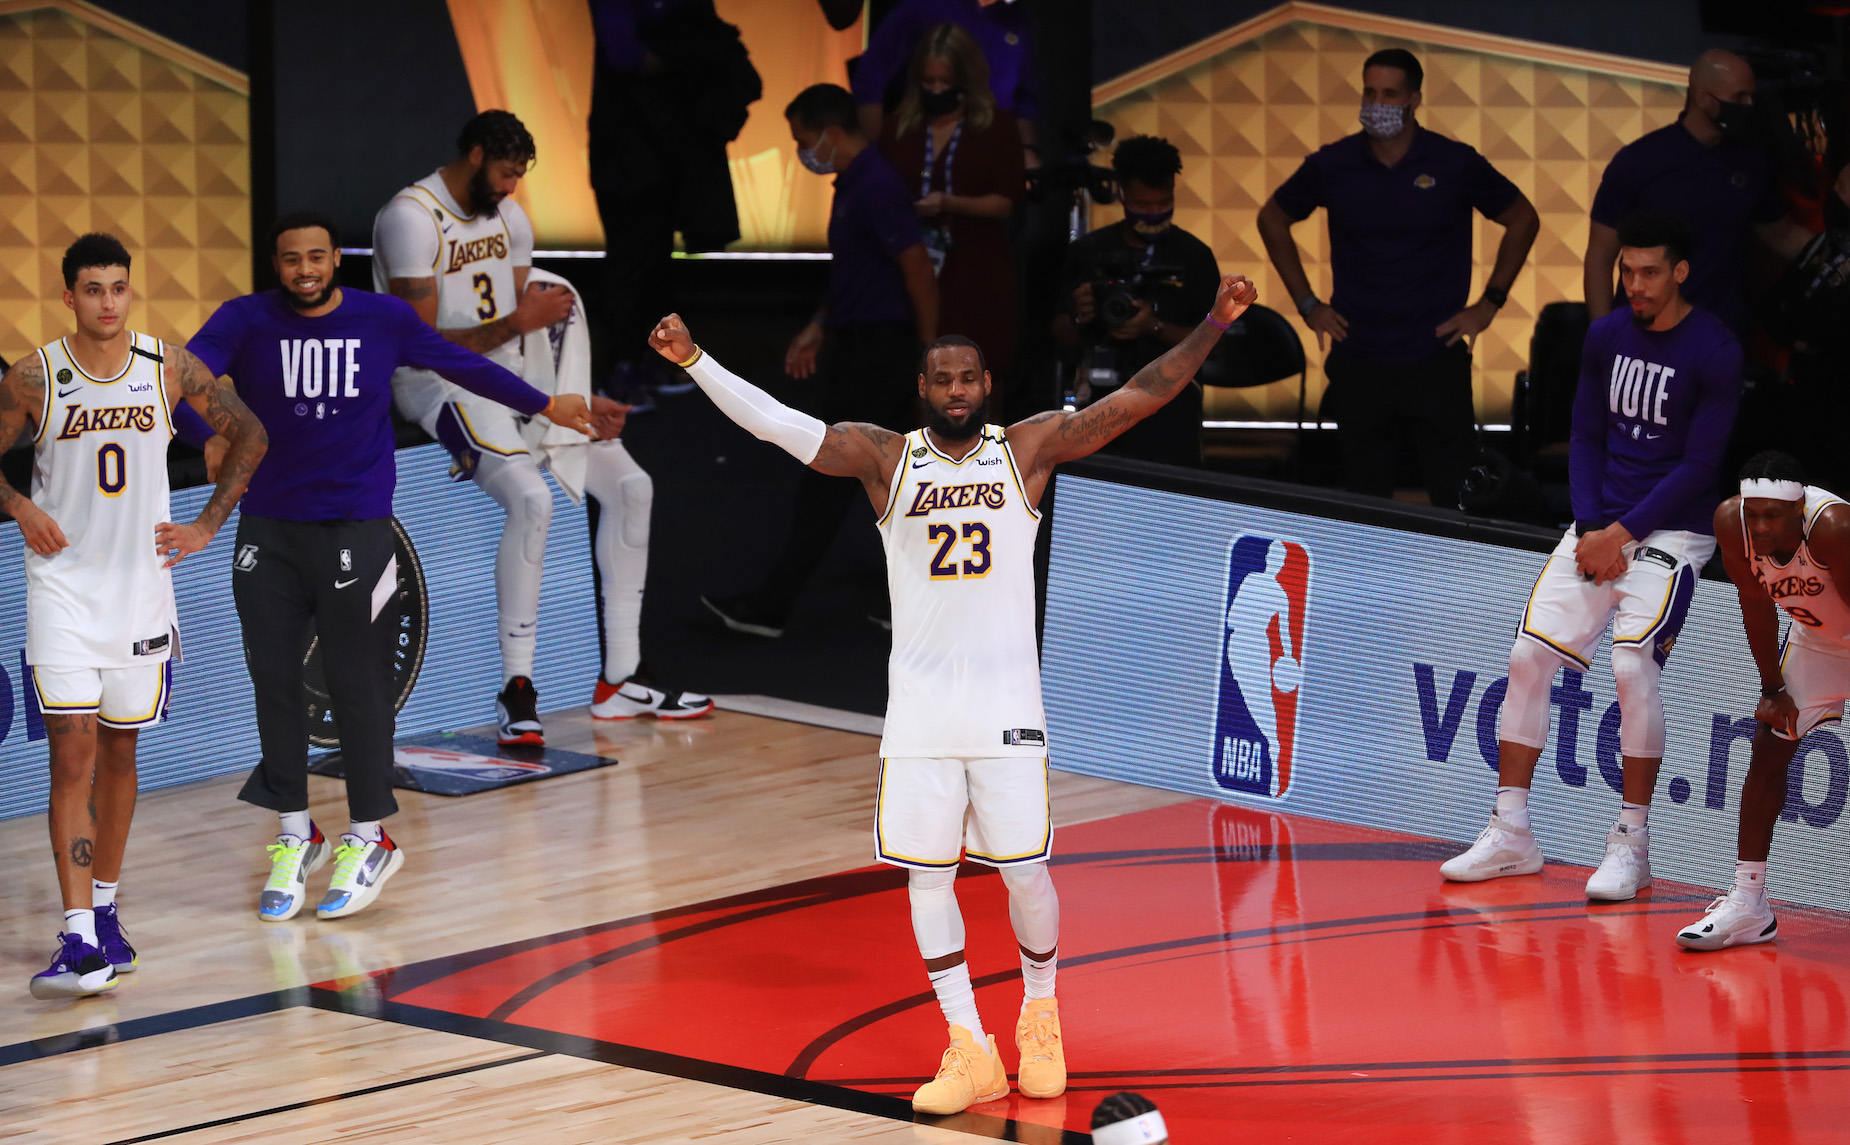 After winning another NBA title, LeBron James strengthened his claim to basketball's GOAT title.